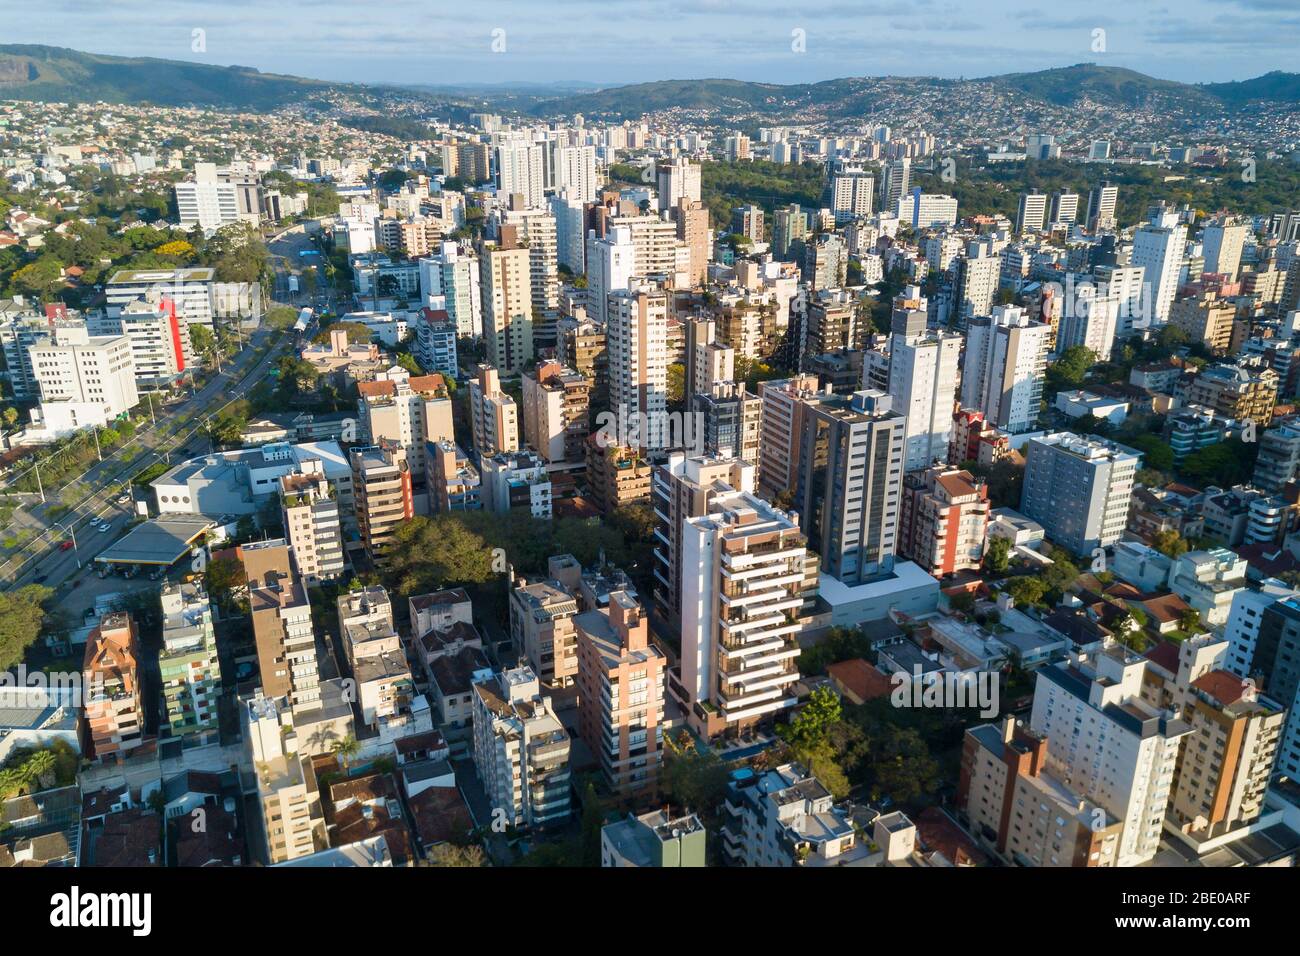 https://c8.alamy.com/comp/2BE0ARF/porto-alegre-rs-brazil-drone-view-petropolis-neighborhood-an-upper-class-area-with-residential-and-commercial-buildings-aerial-view-2BE0ARF.jpg